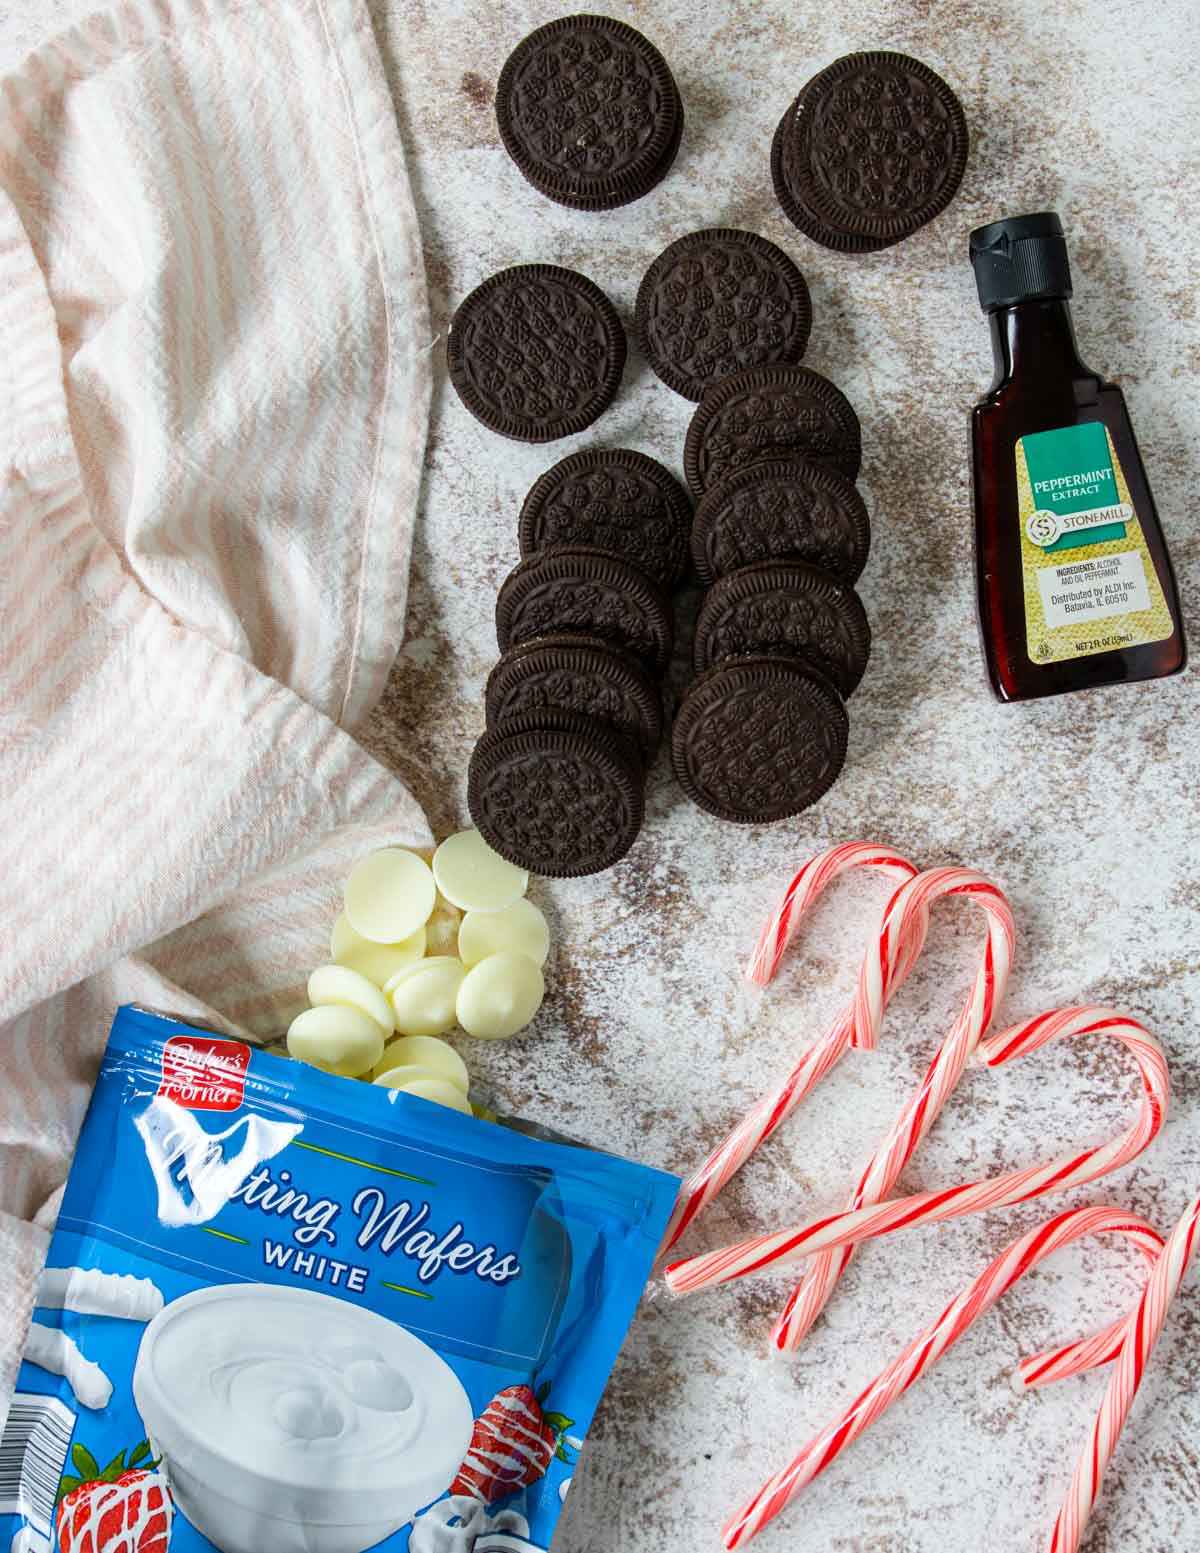 4 ingredients laid out to make peppermint bark oreos